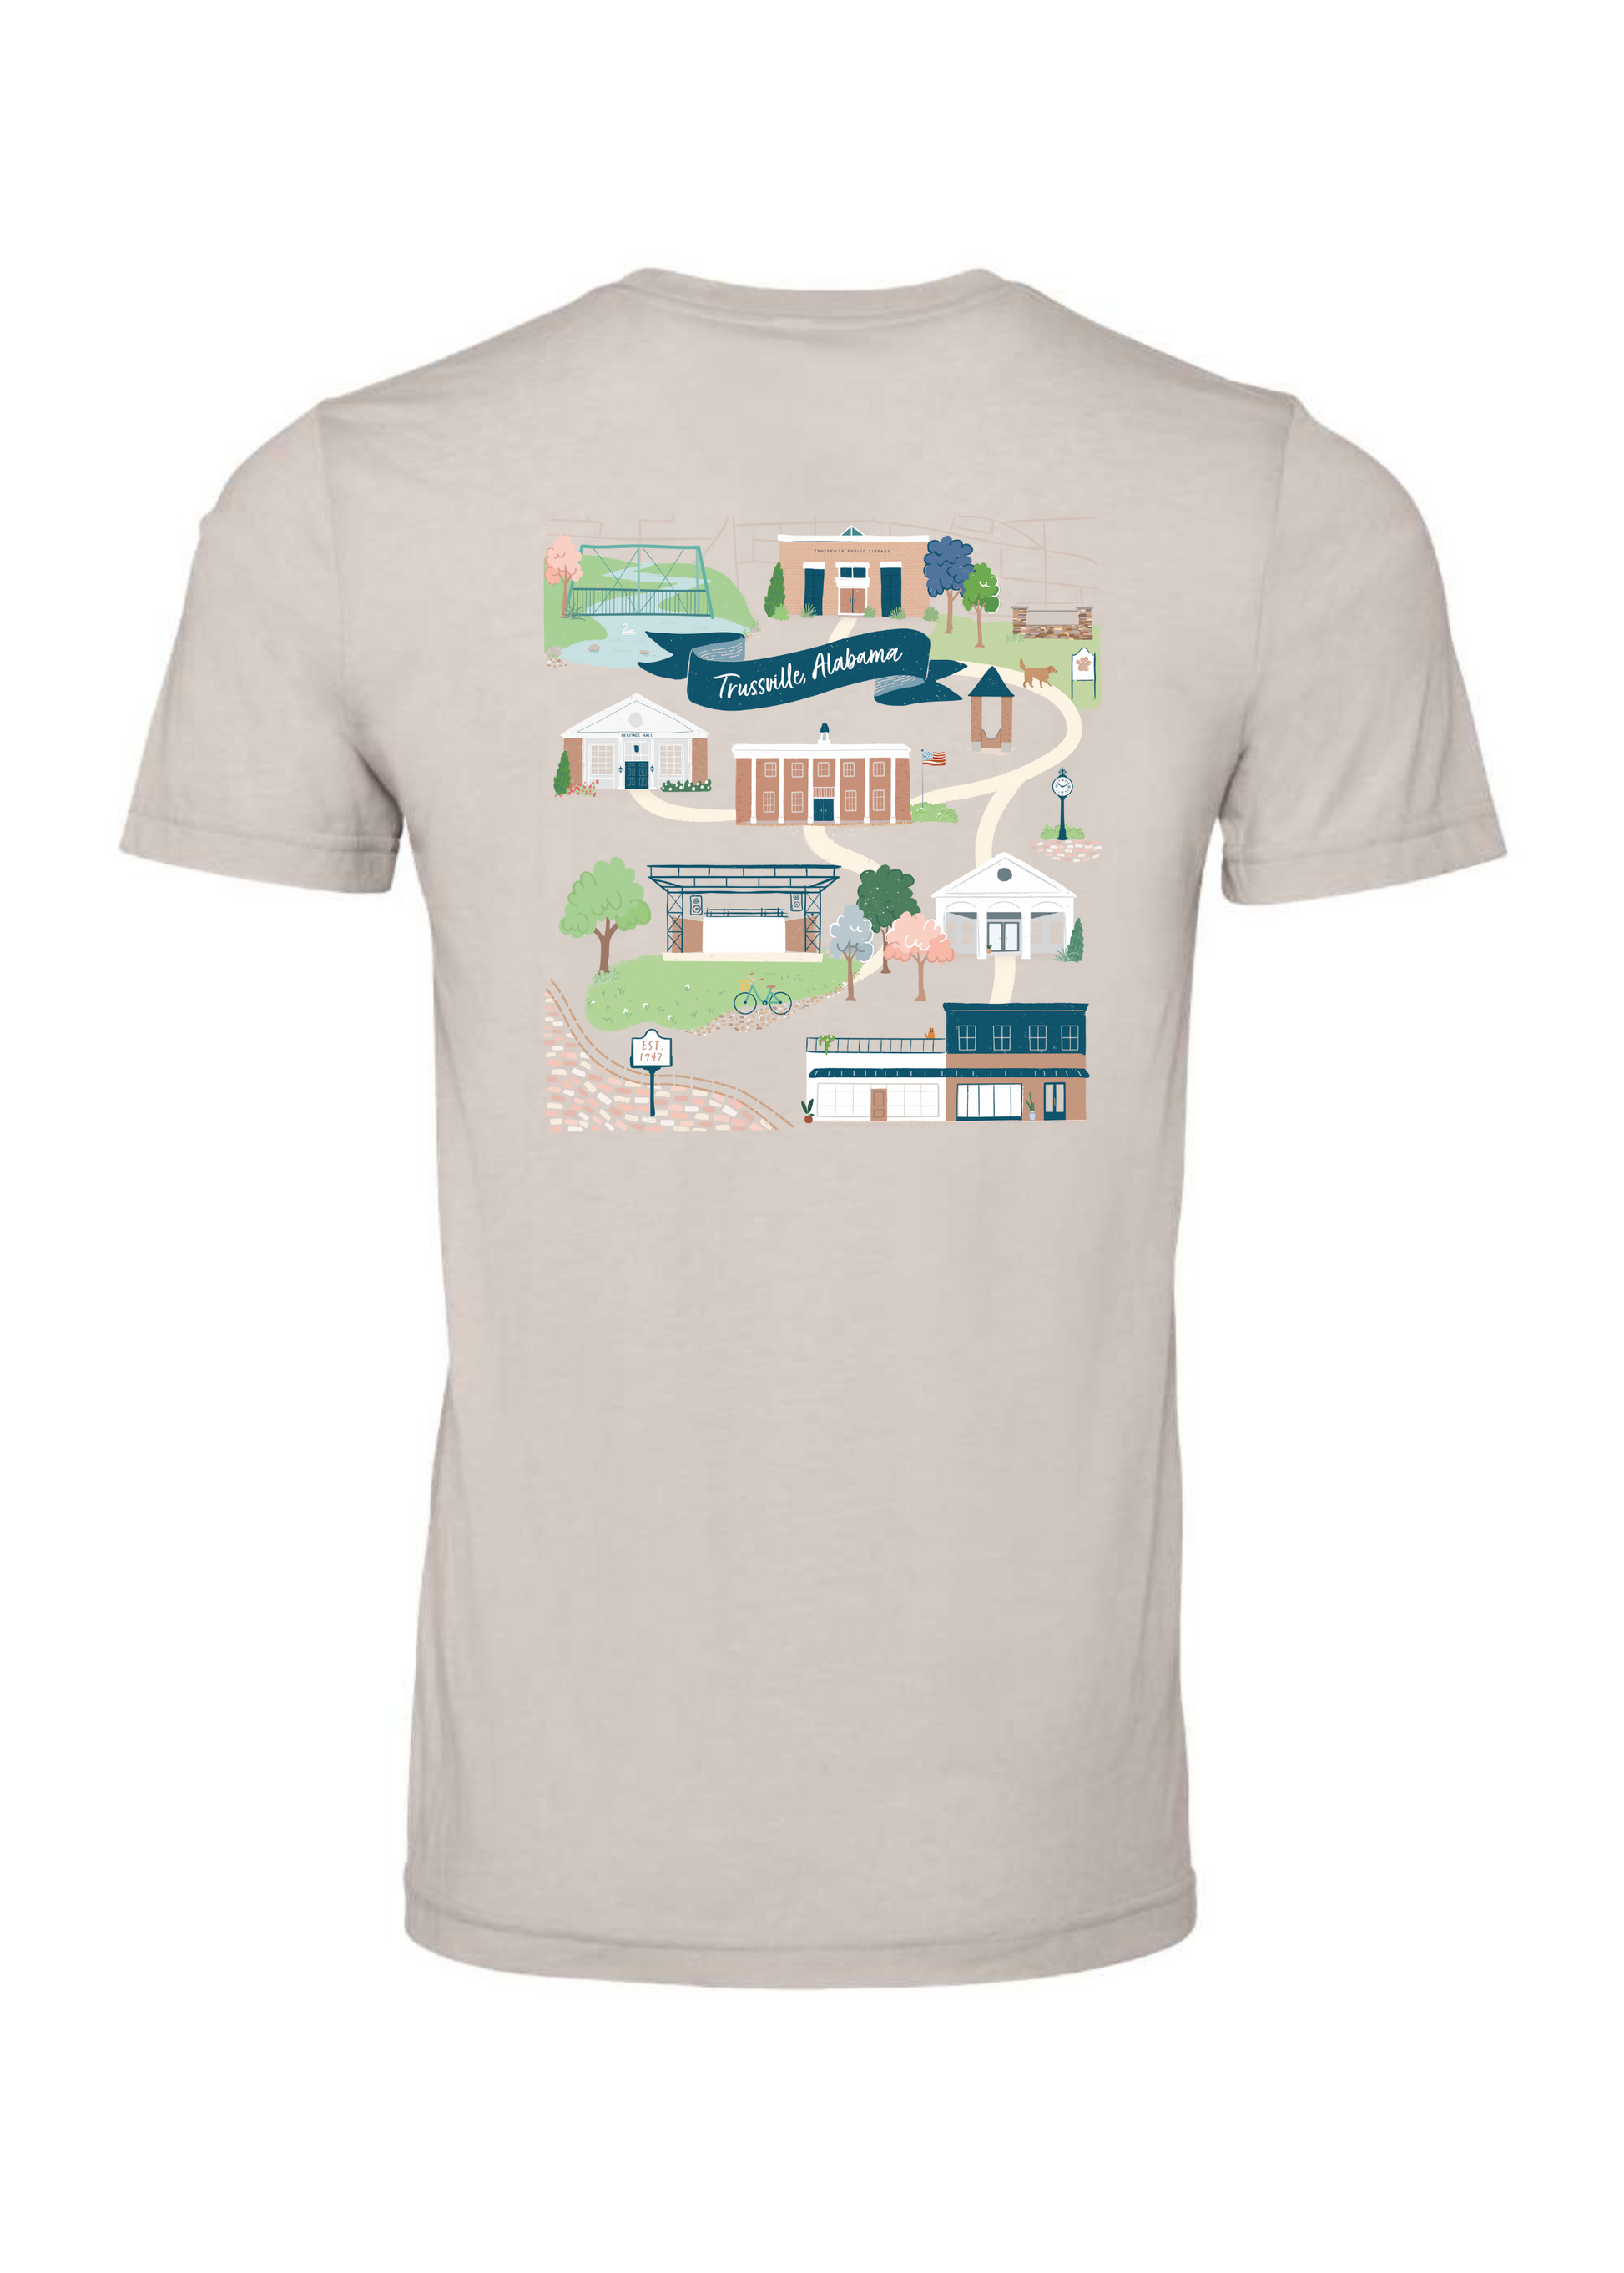 Trussville City Landmarks | Youth Tee-Kids Tees-Sister Shirts-Sister Shirts, Cute & Custom Tees for Mama & Littles in Trussville, Alabama.